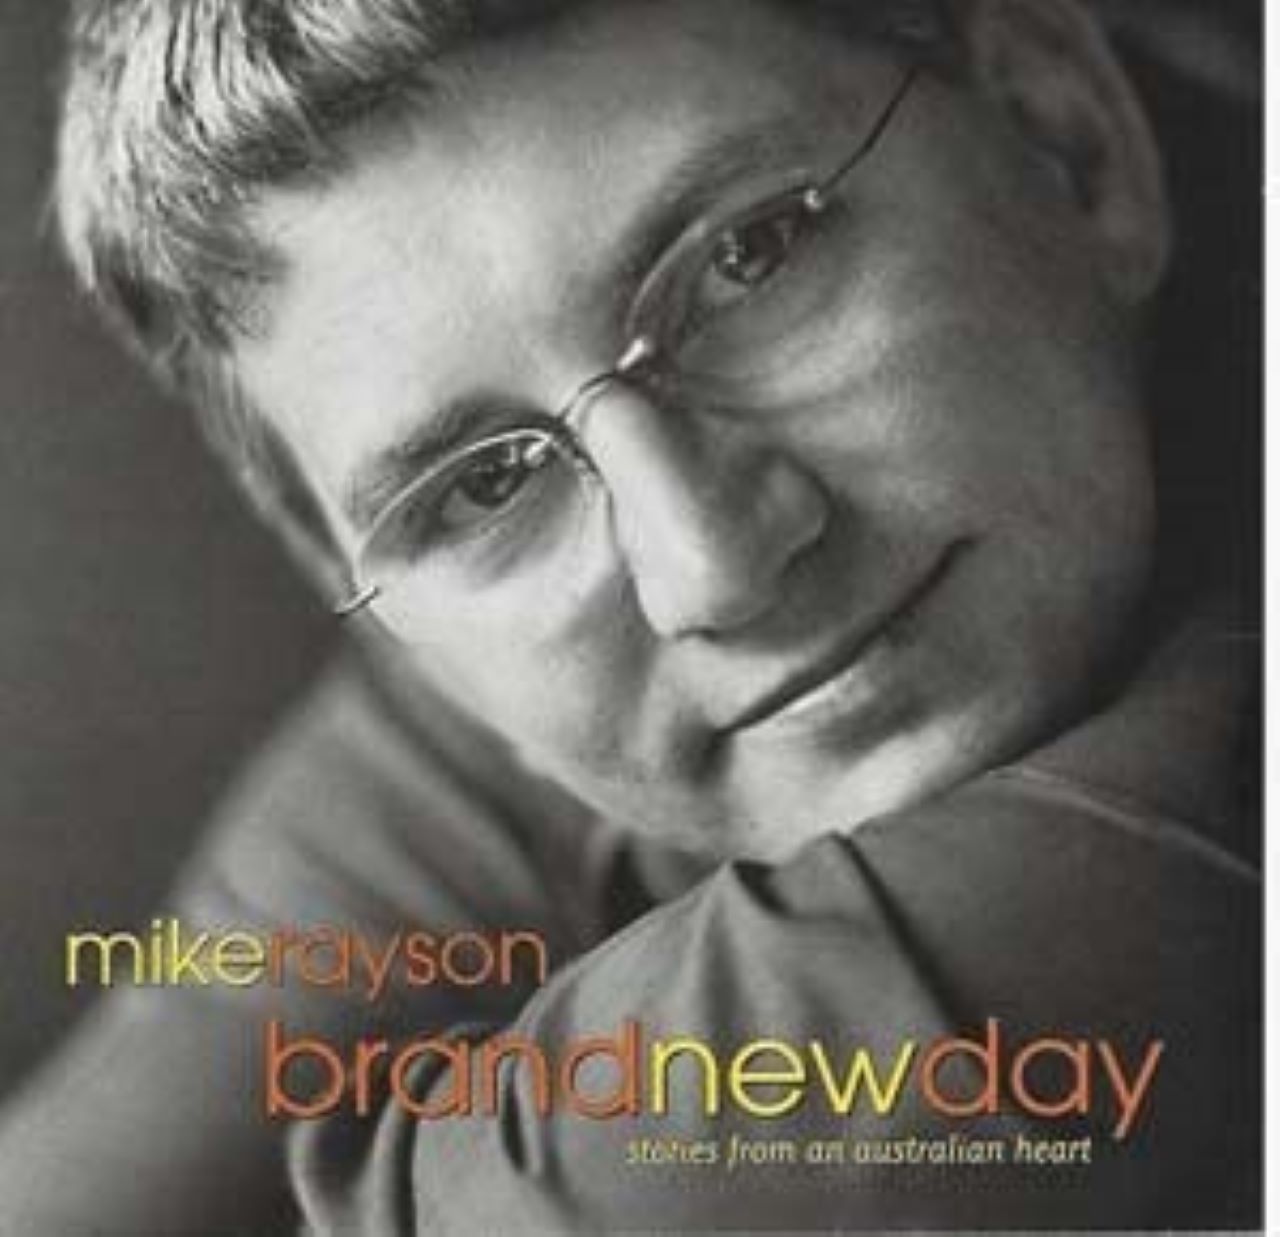 Mike Rayson - Brand New Day cover album